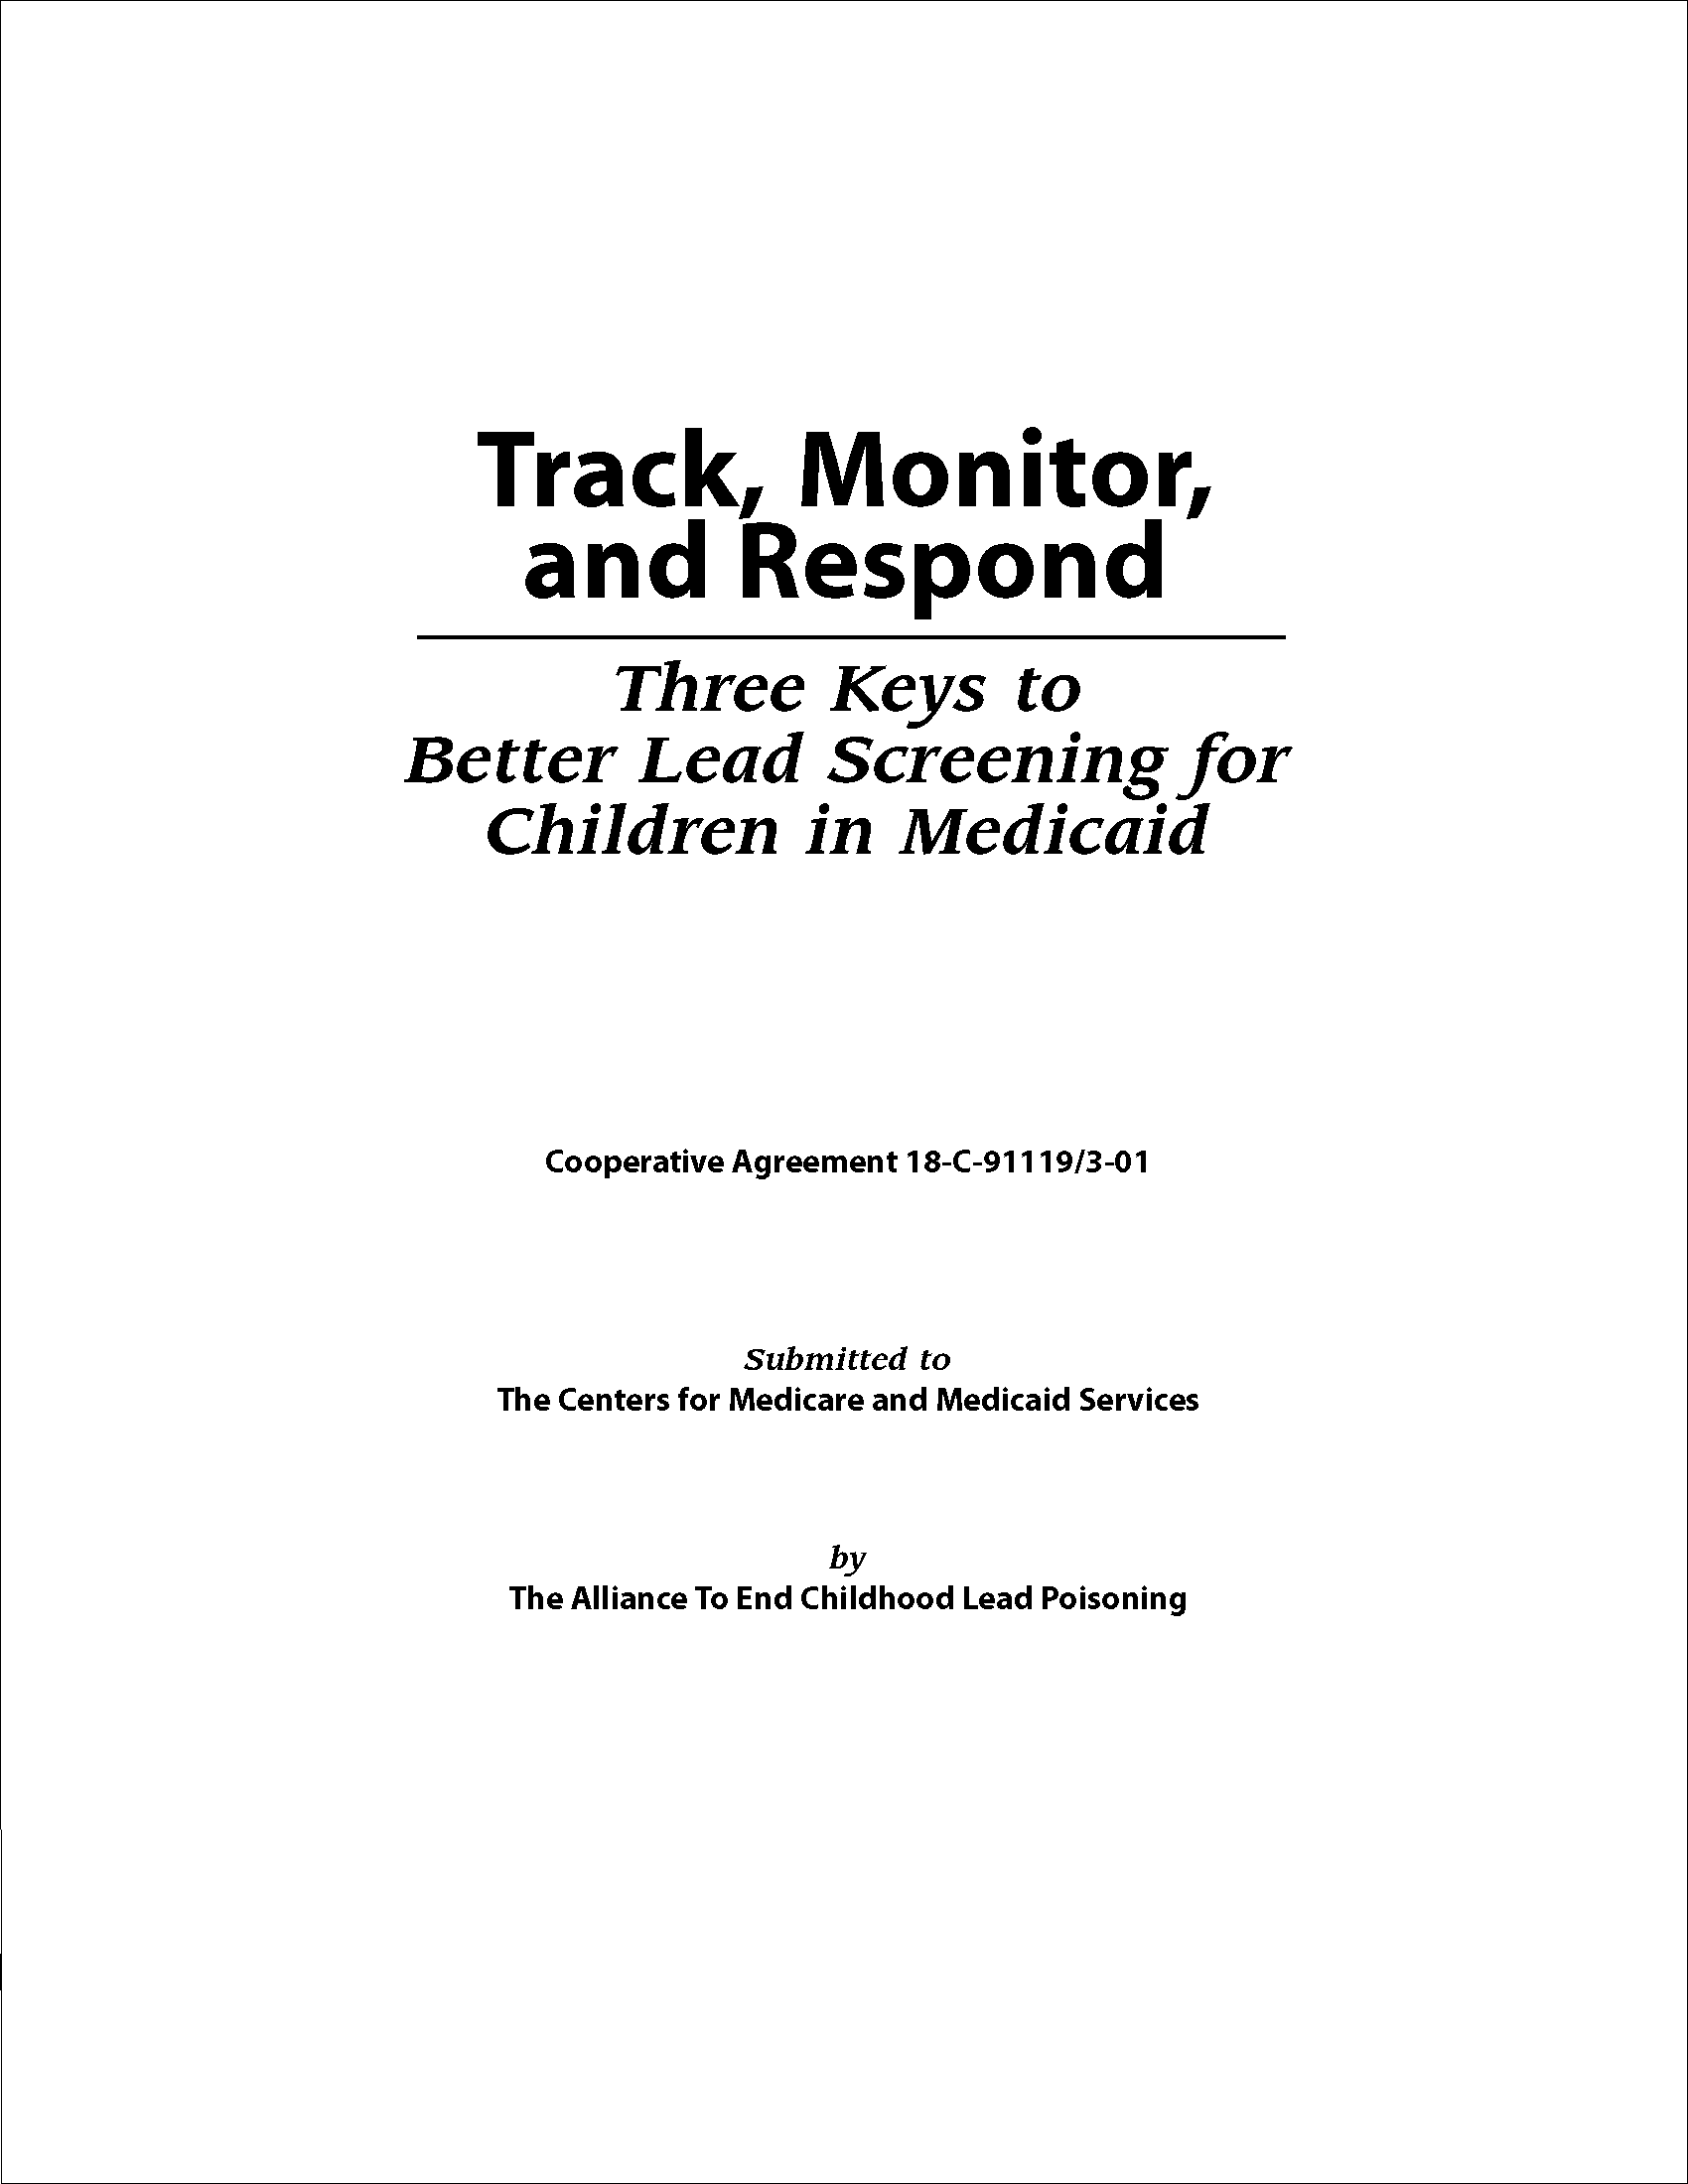 Track, Monitor, and Respond: Three Keys to Better Lead Screening for Children in Medicaid